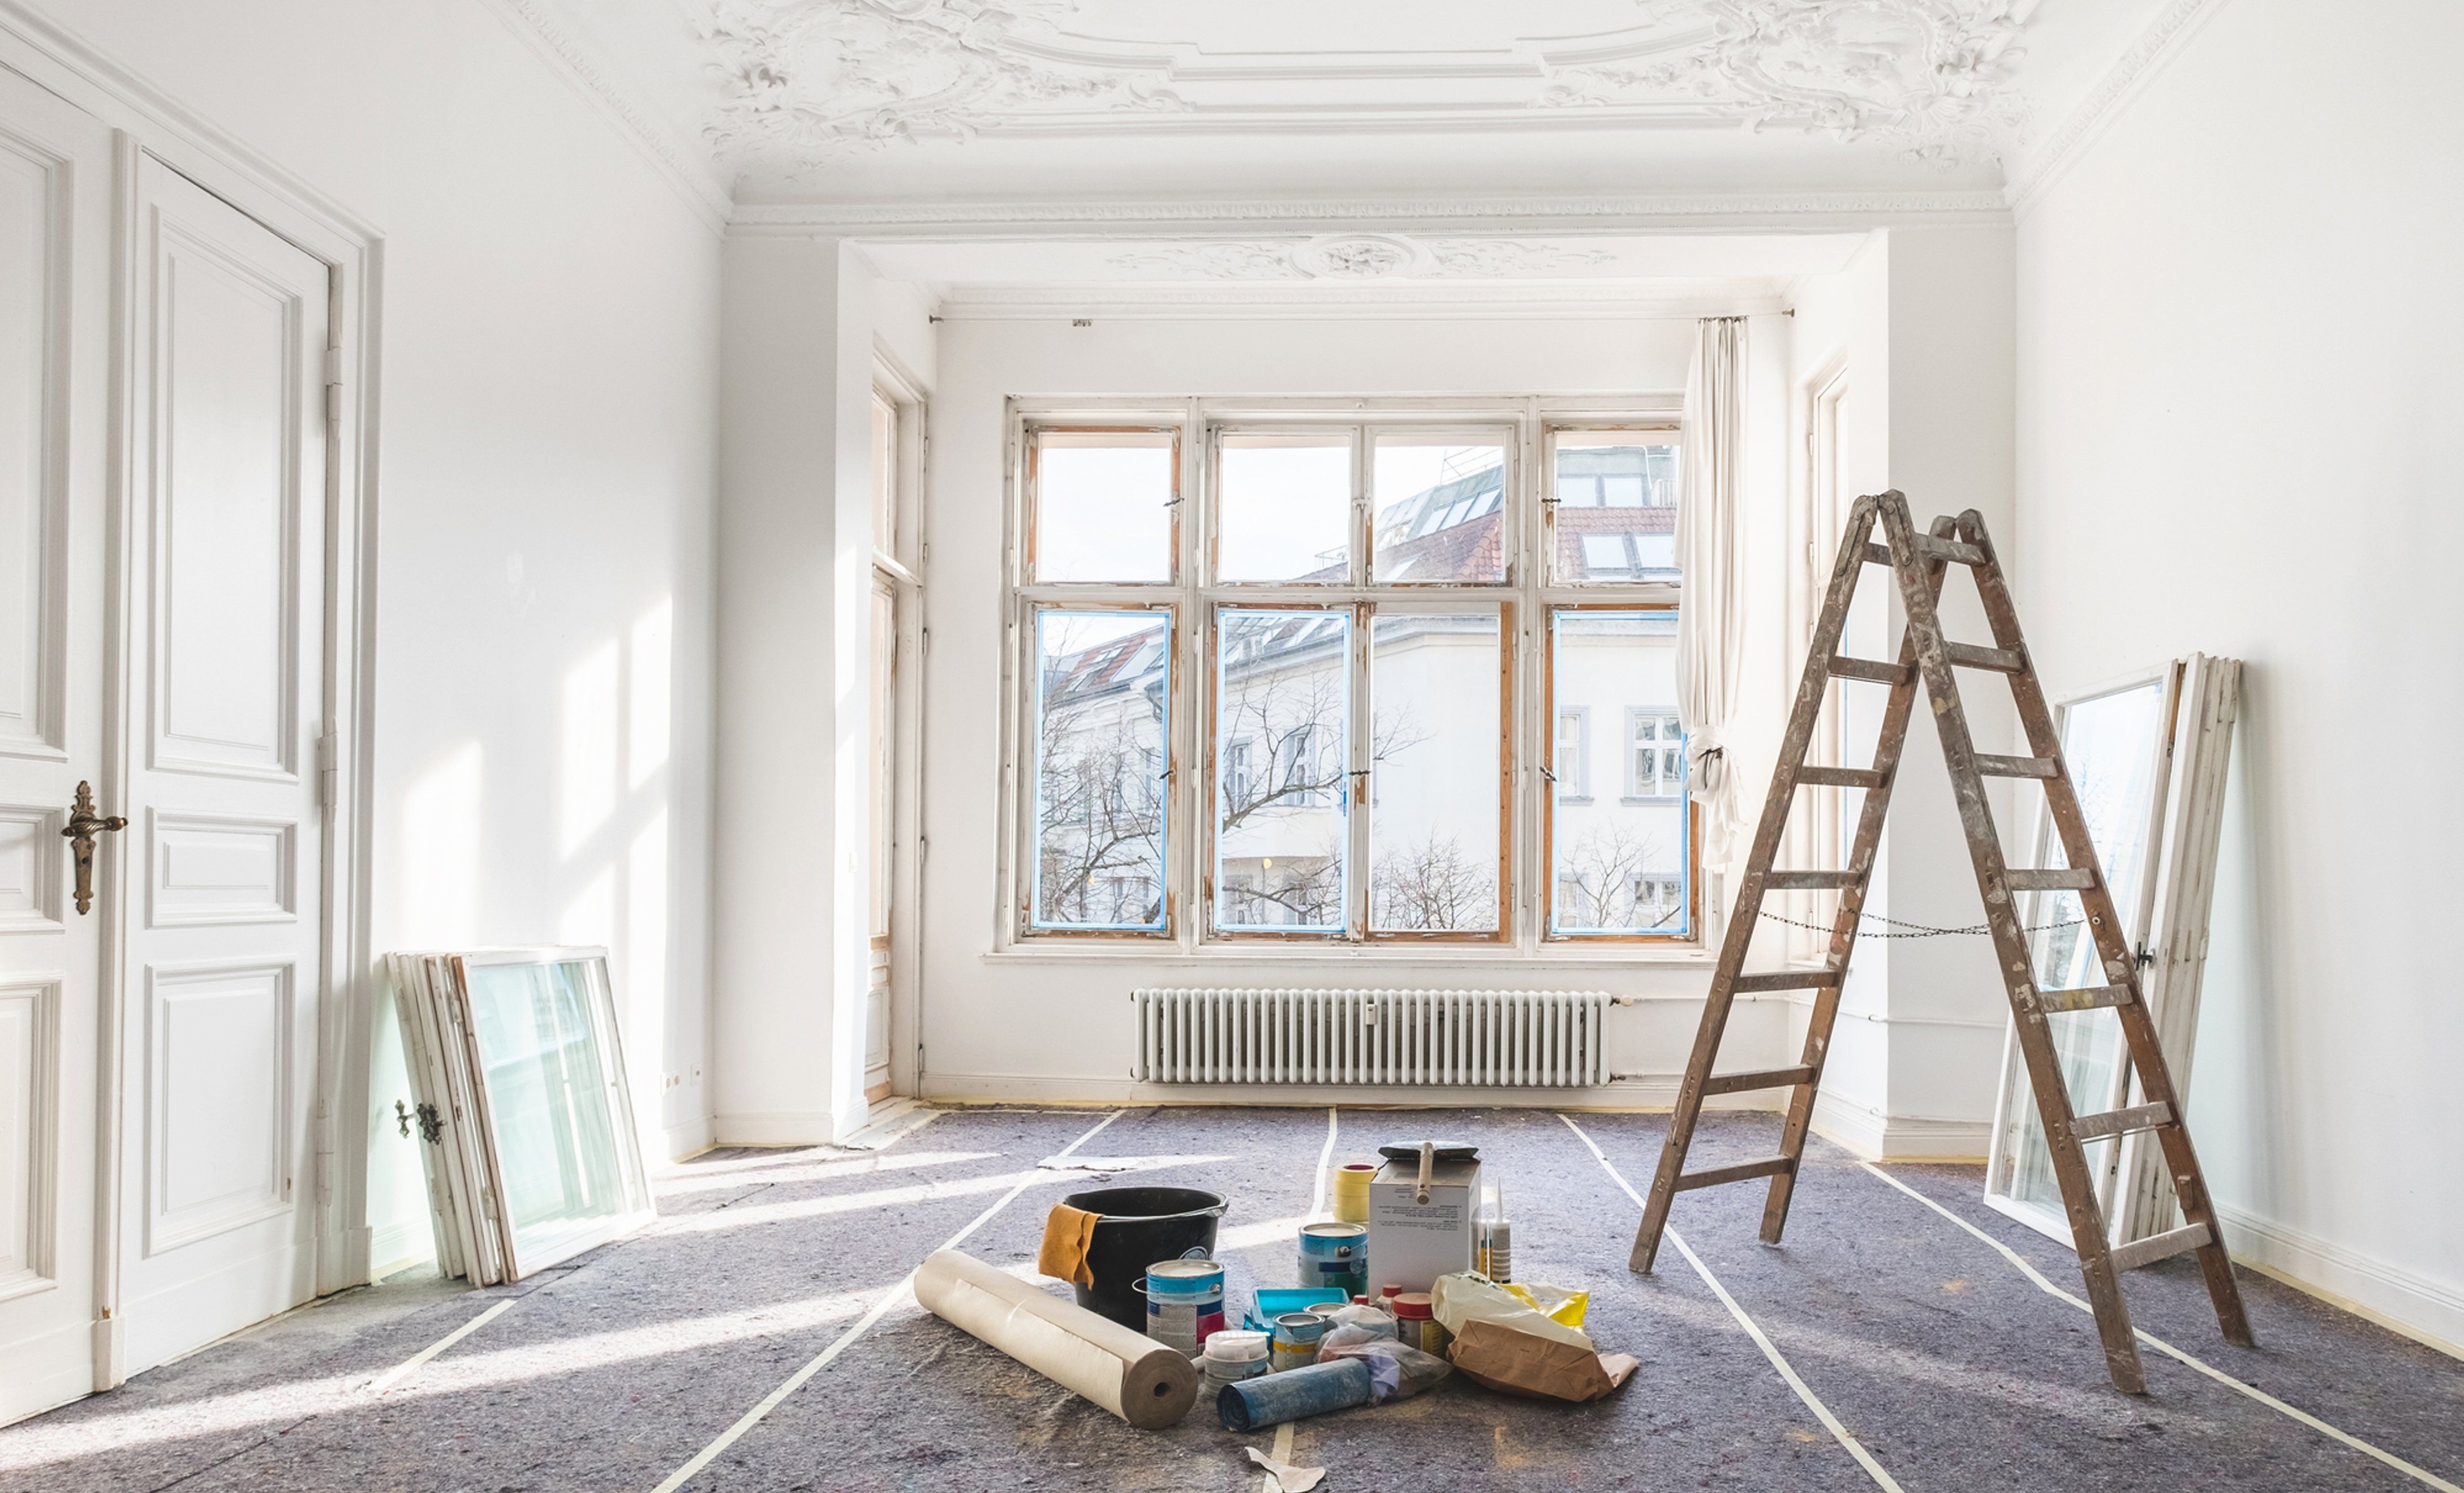 How to Increase Your Home's Value Through Renovation?